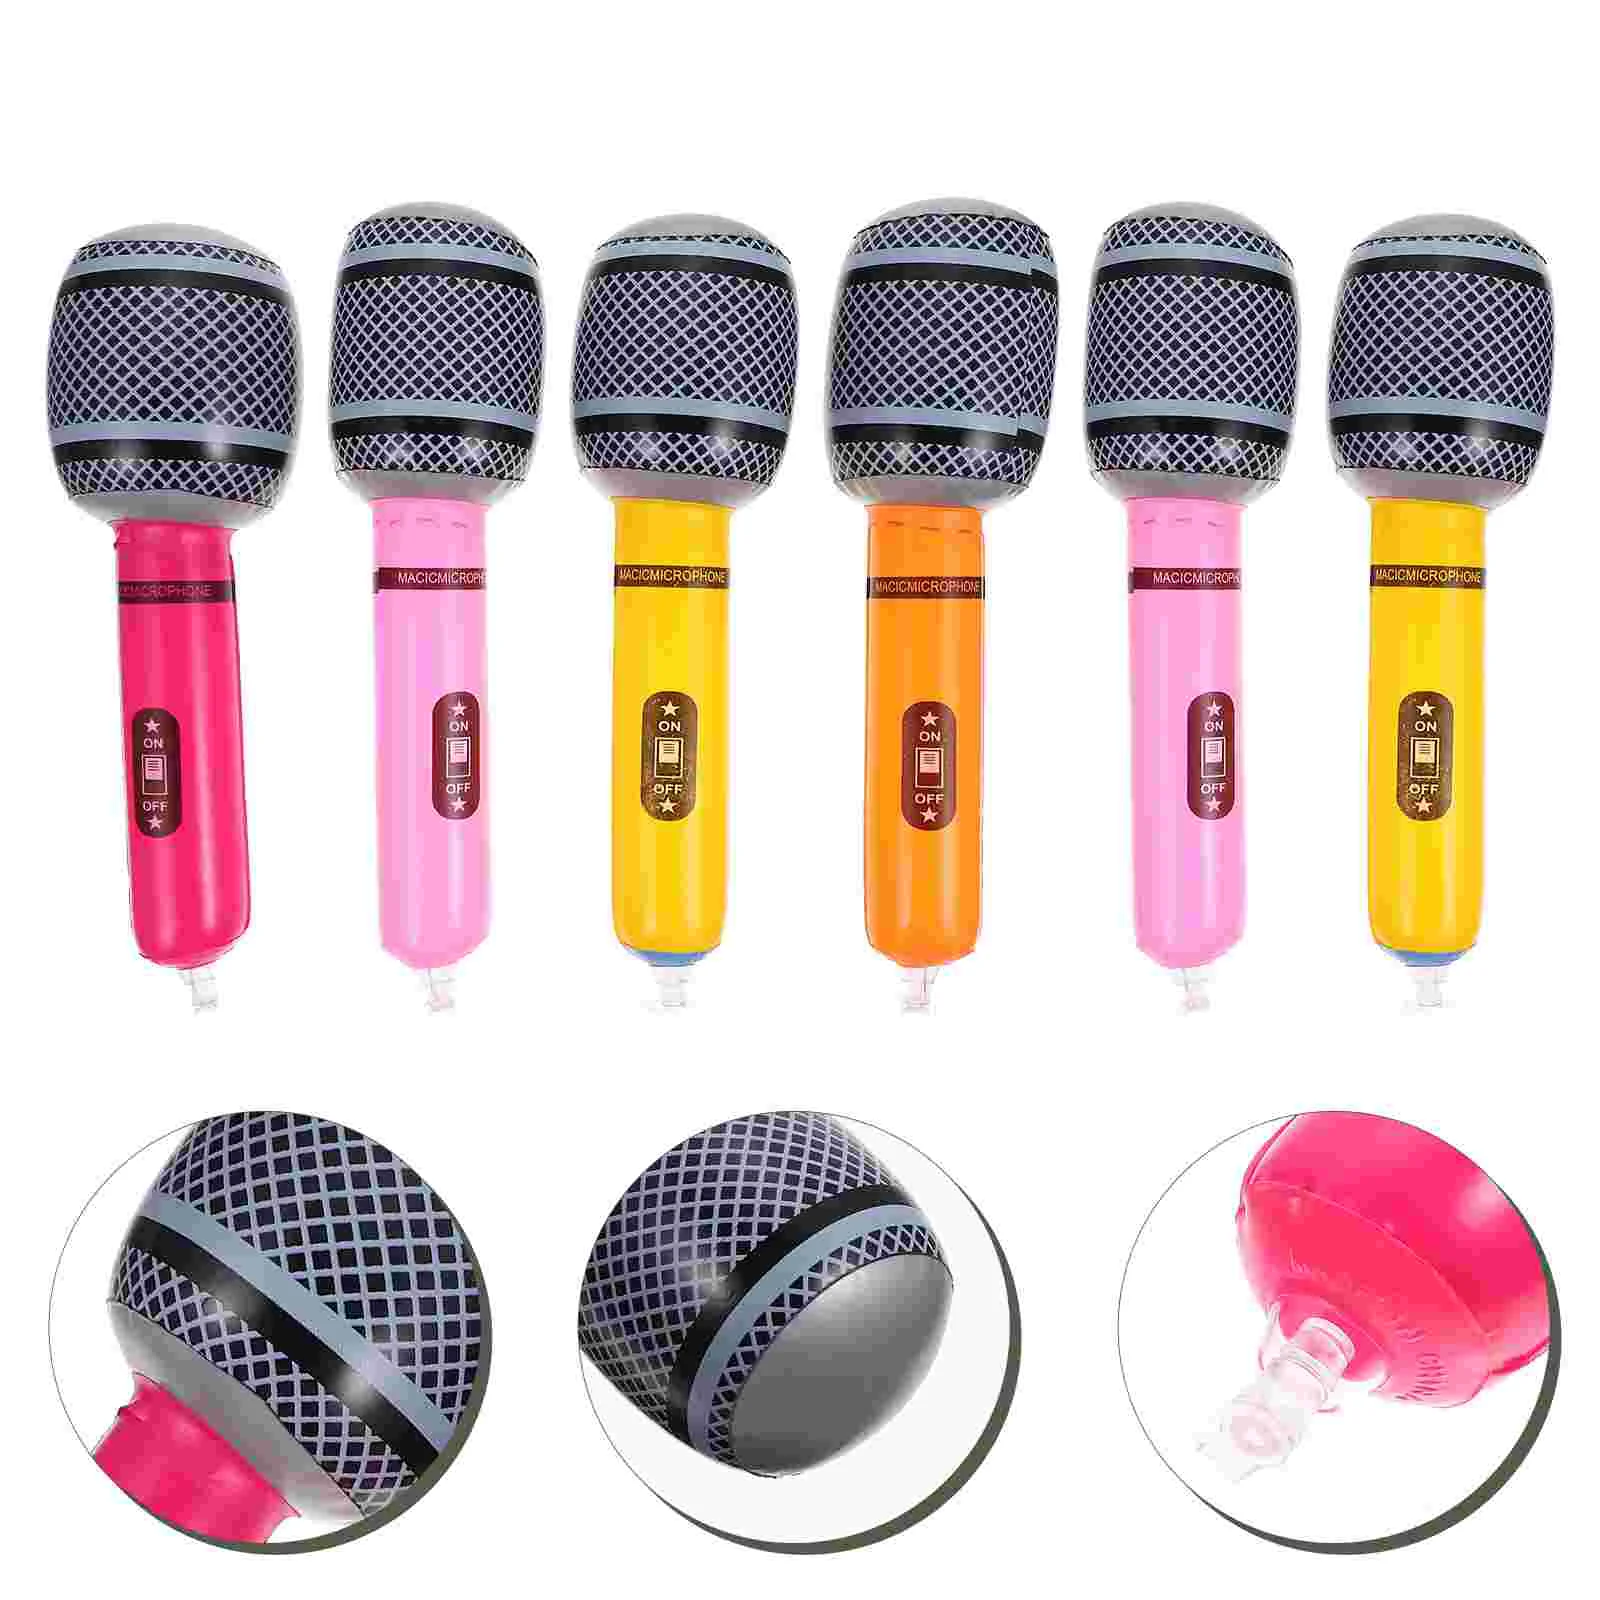 

6 Pcs Inflatable Microphone Children Accessory Adorable Prop Baby Music Toy Puzzle Toys Kids Supply Interactive Props Present